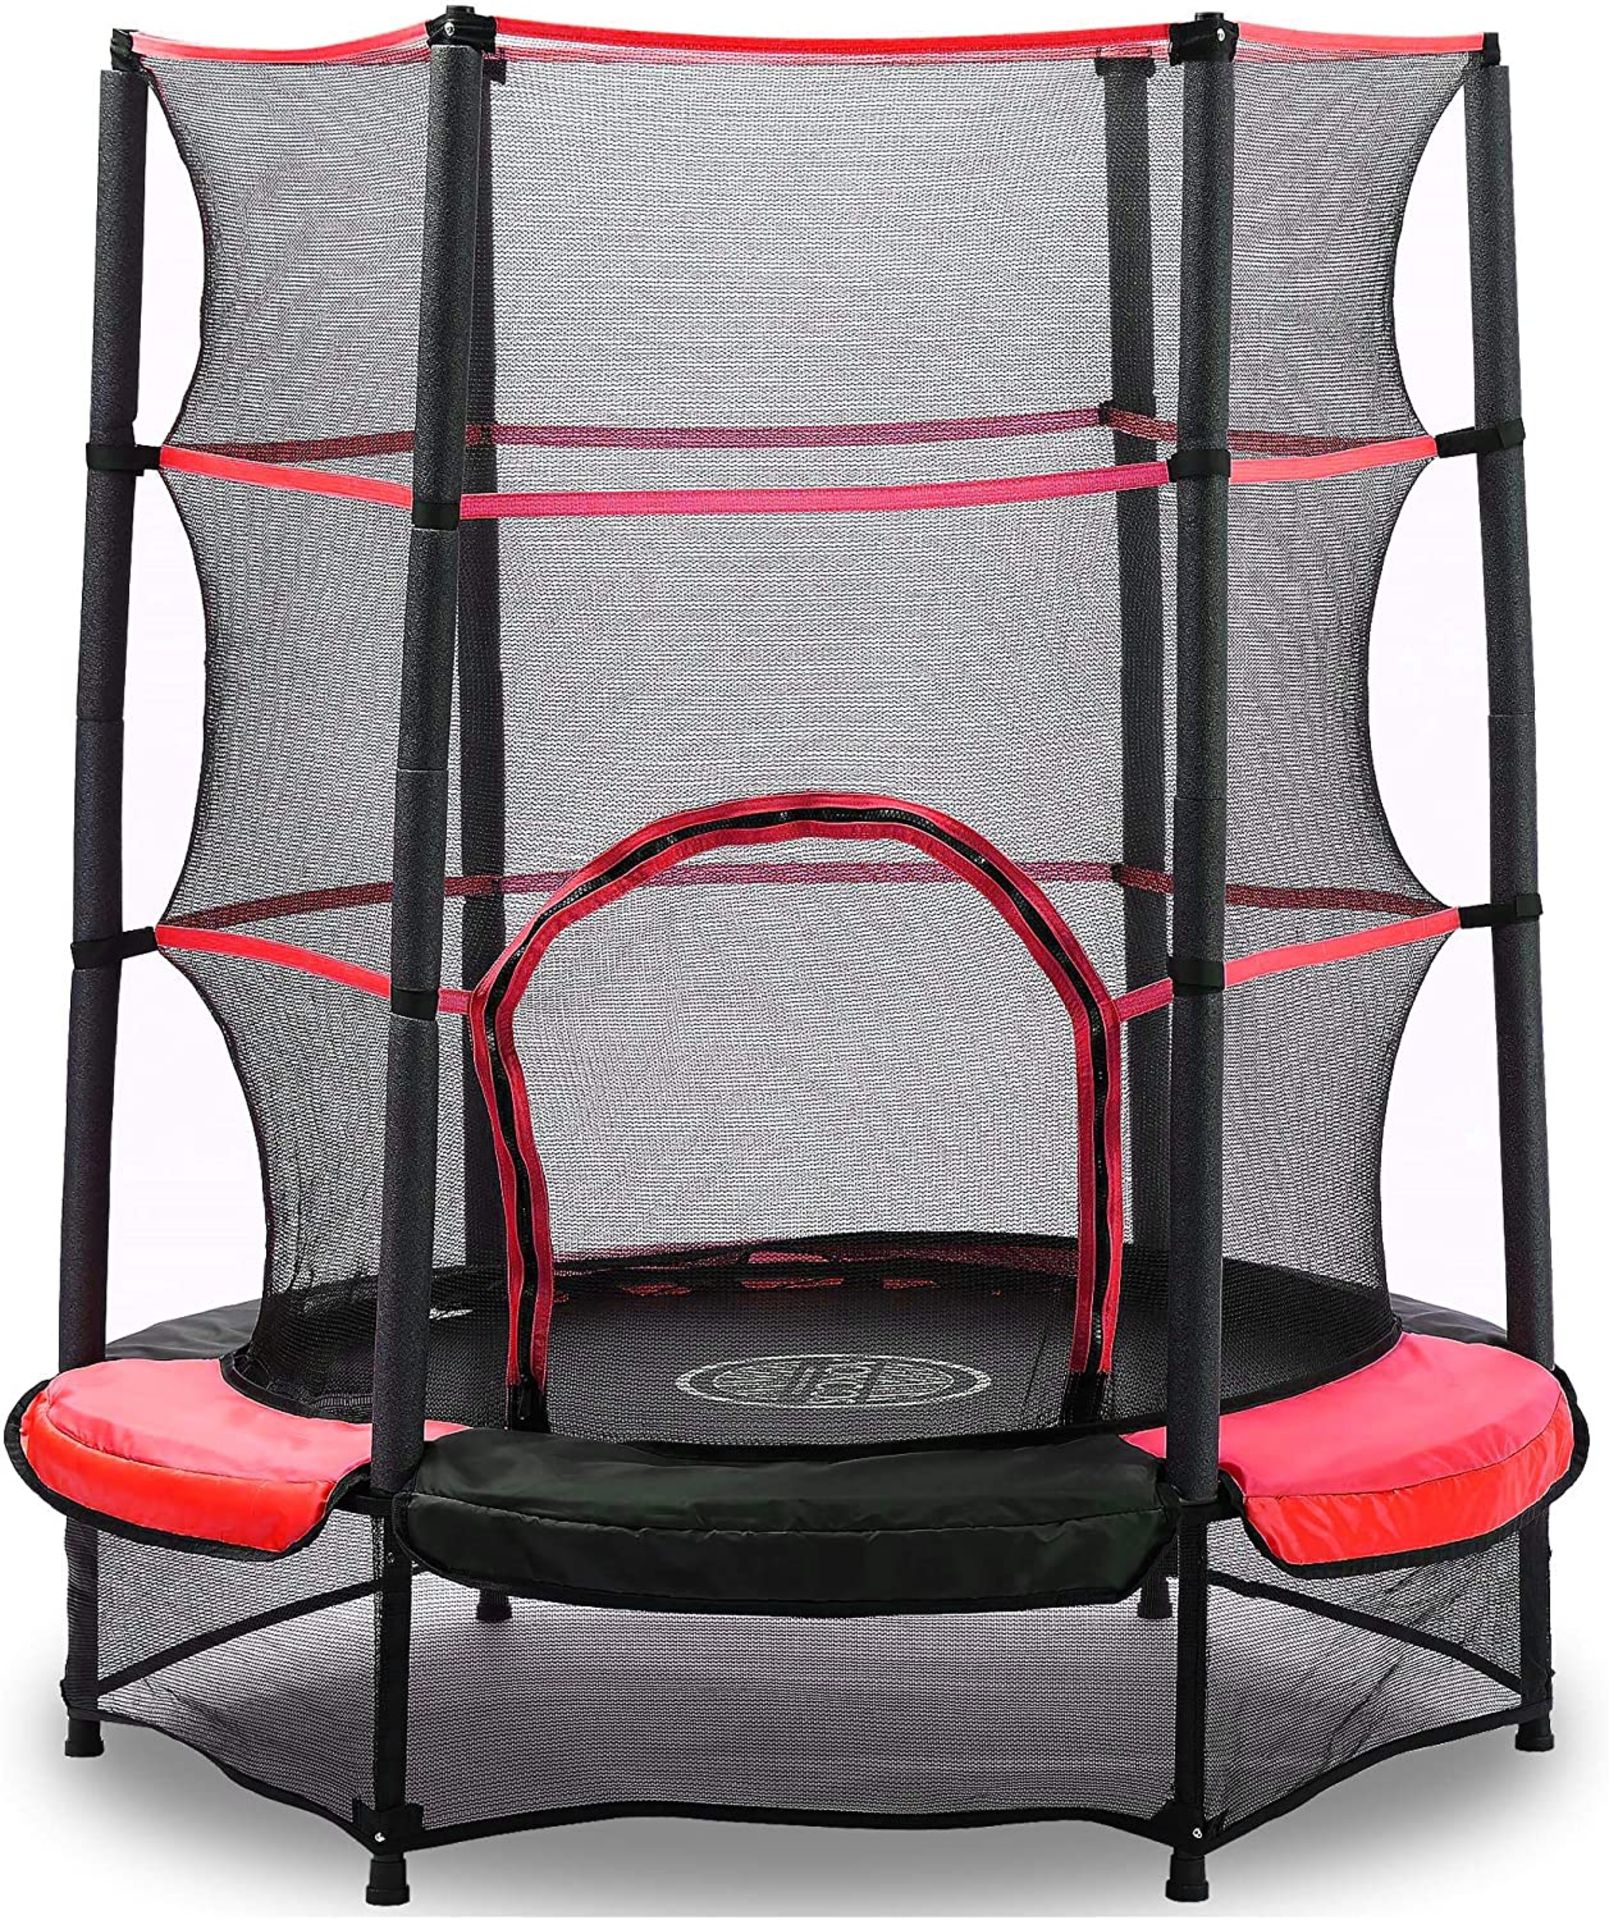 Brand new 54” Trampoline for Kids, Mini Toddler Trampoline with Safety Enclosure, Indoor & Outdoor